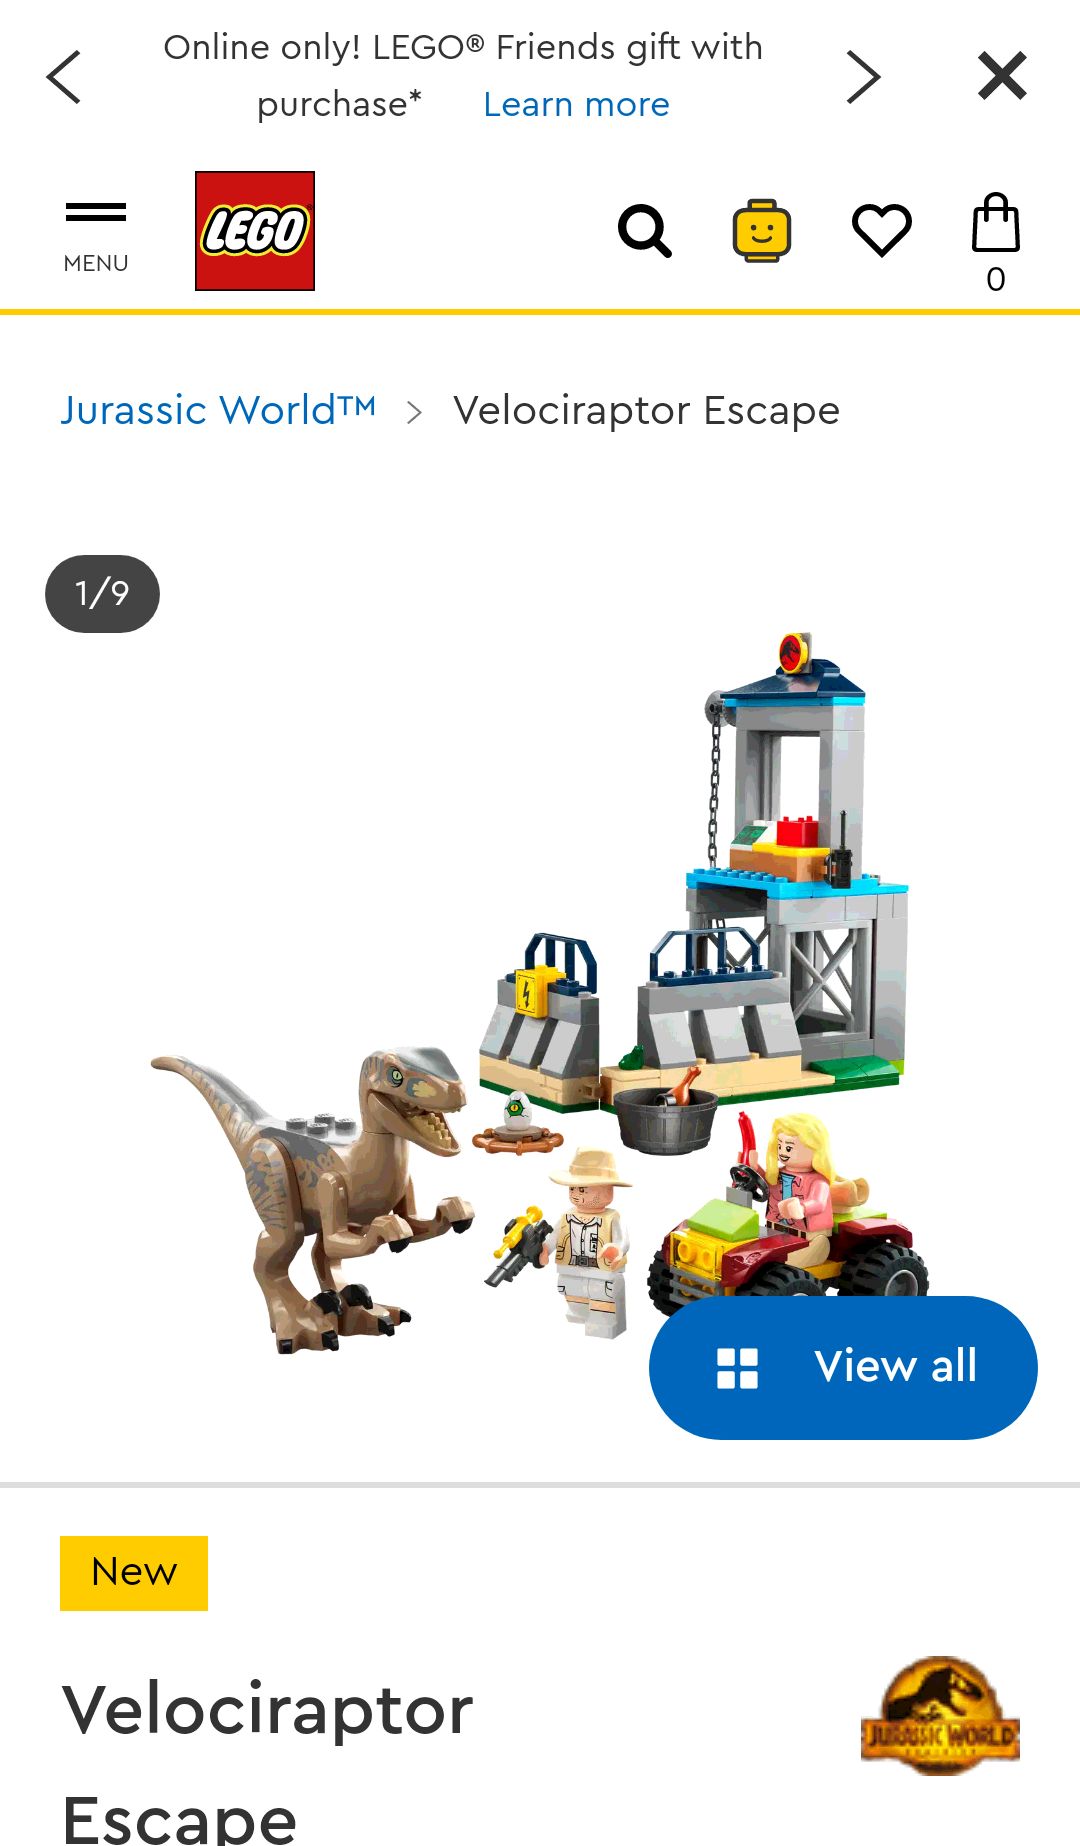 Velociraptor Escape 76957 | Jurassic World™ | Buy online at the Official LEGO® Shop US